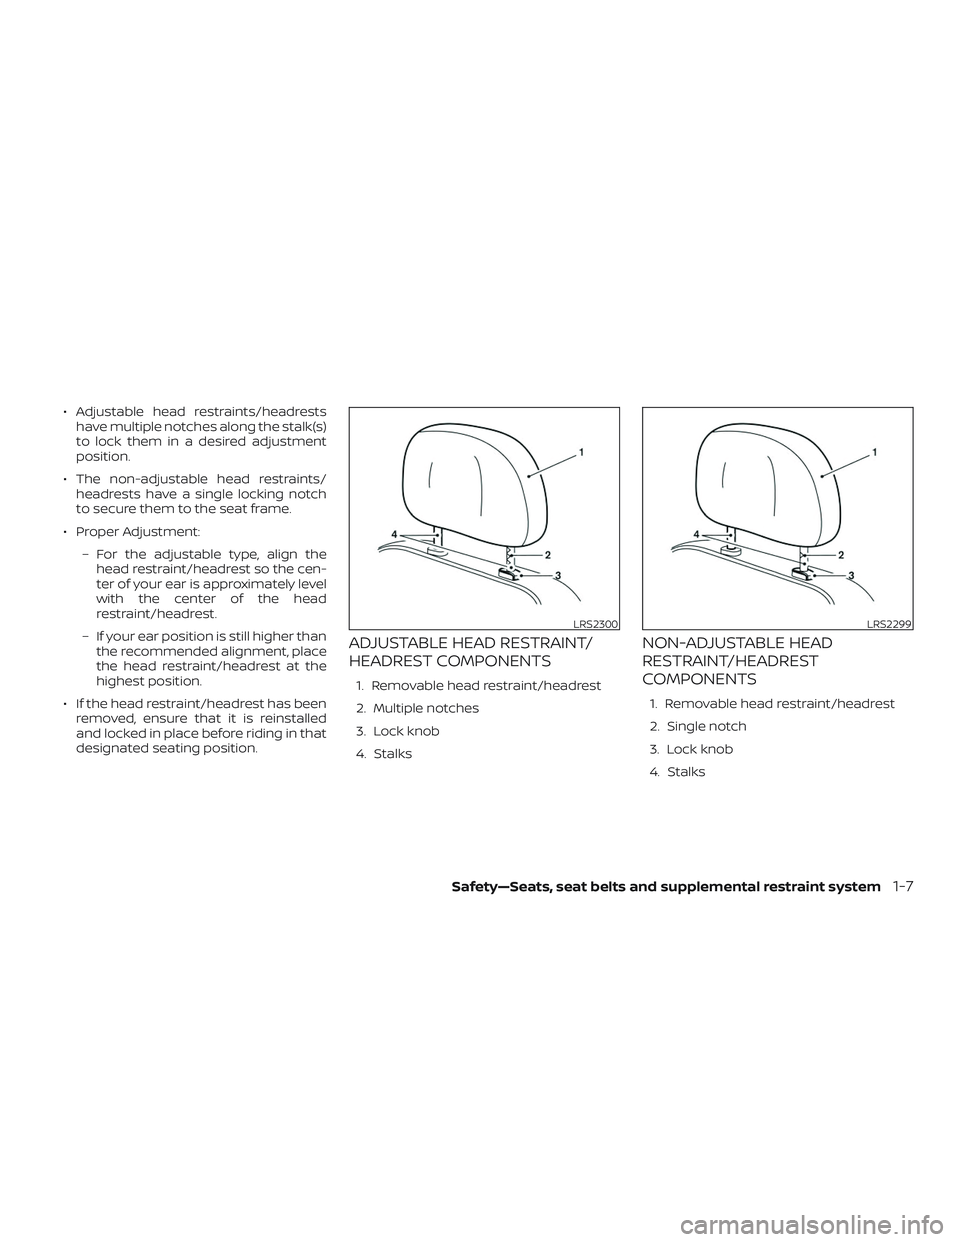 NISSAN MICRA 2018  Owner´s Manual ∙ Adjustable head restraints/headrestshave multiple notches along the stalk(s)
to lock them in a desired adjustment
position.
∙ The non-adjustable head restraints/ headrests have a single locking 